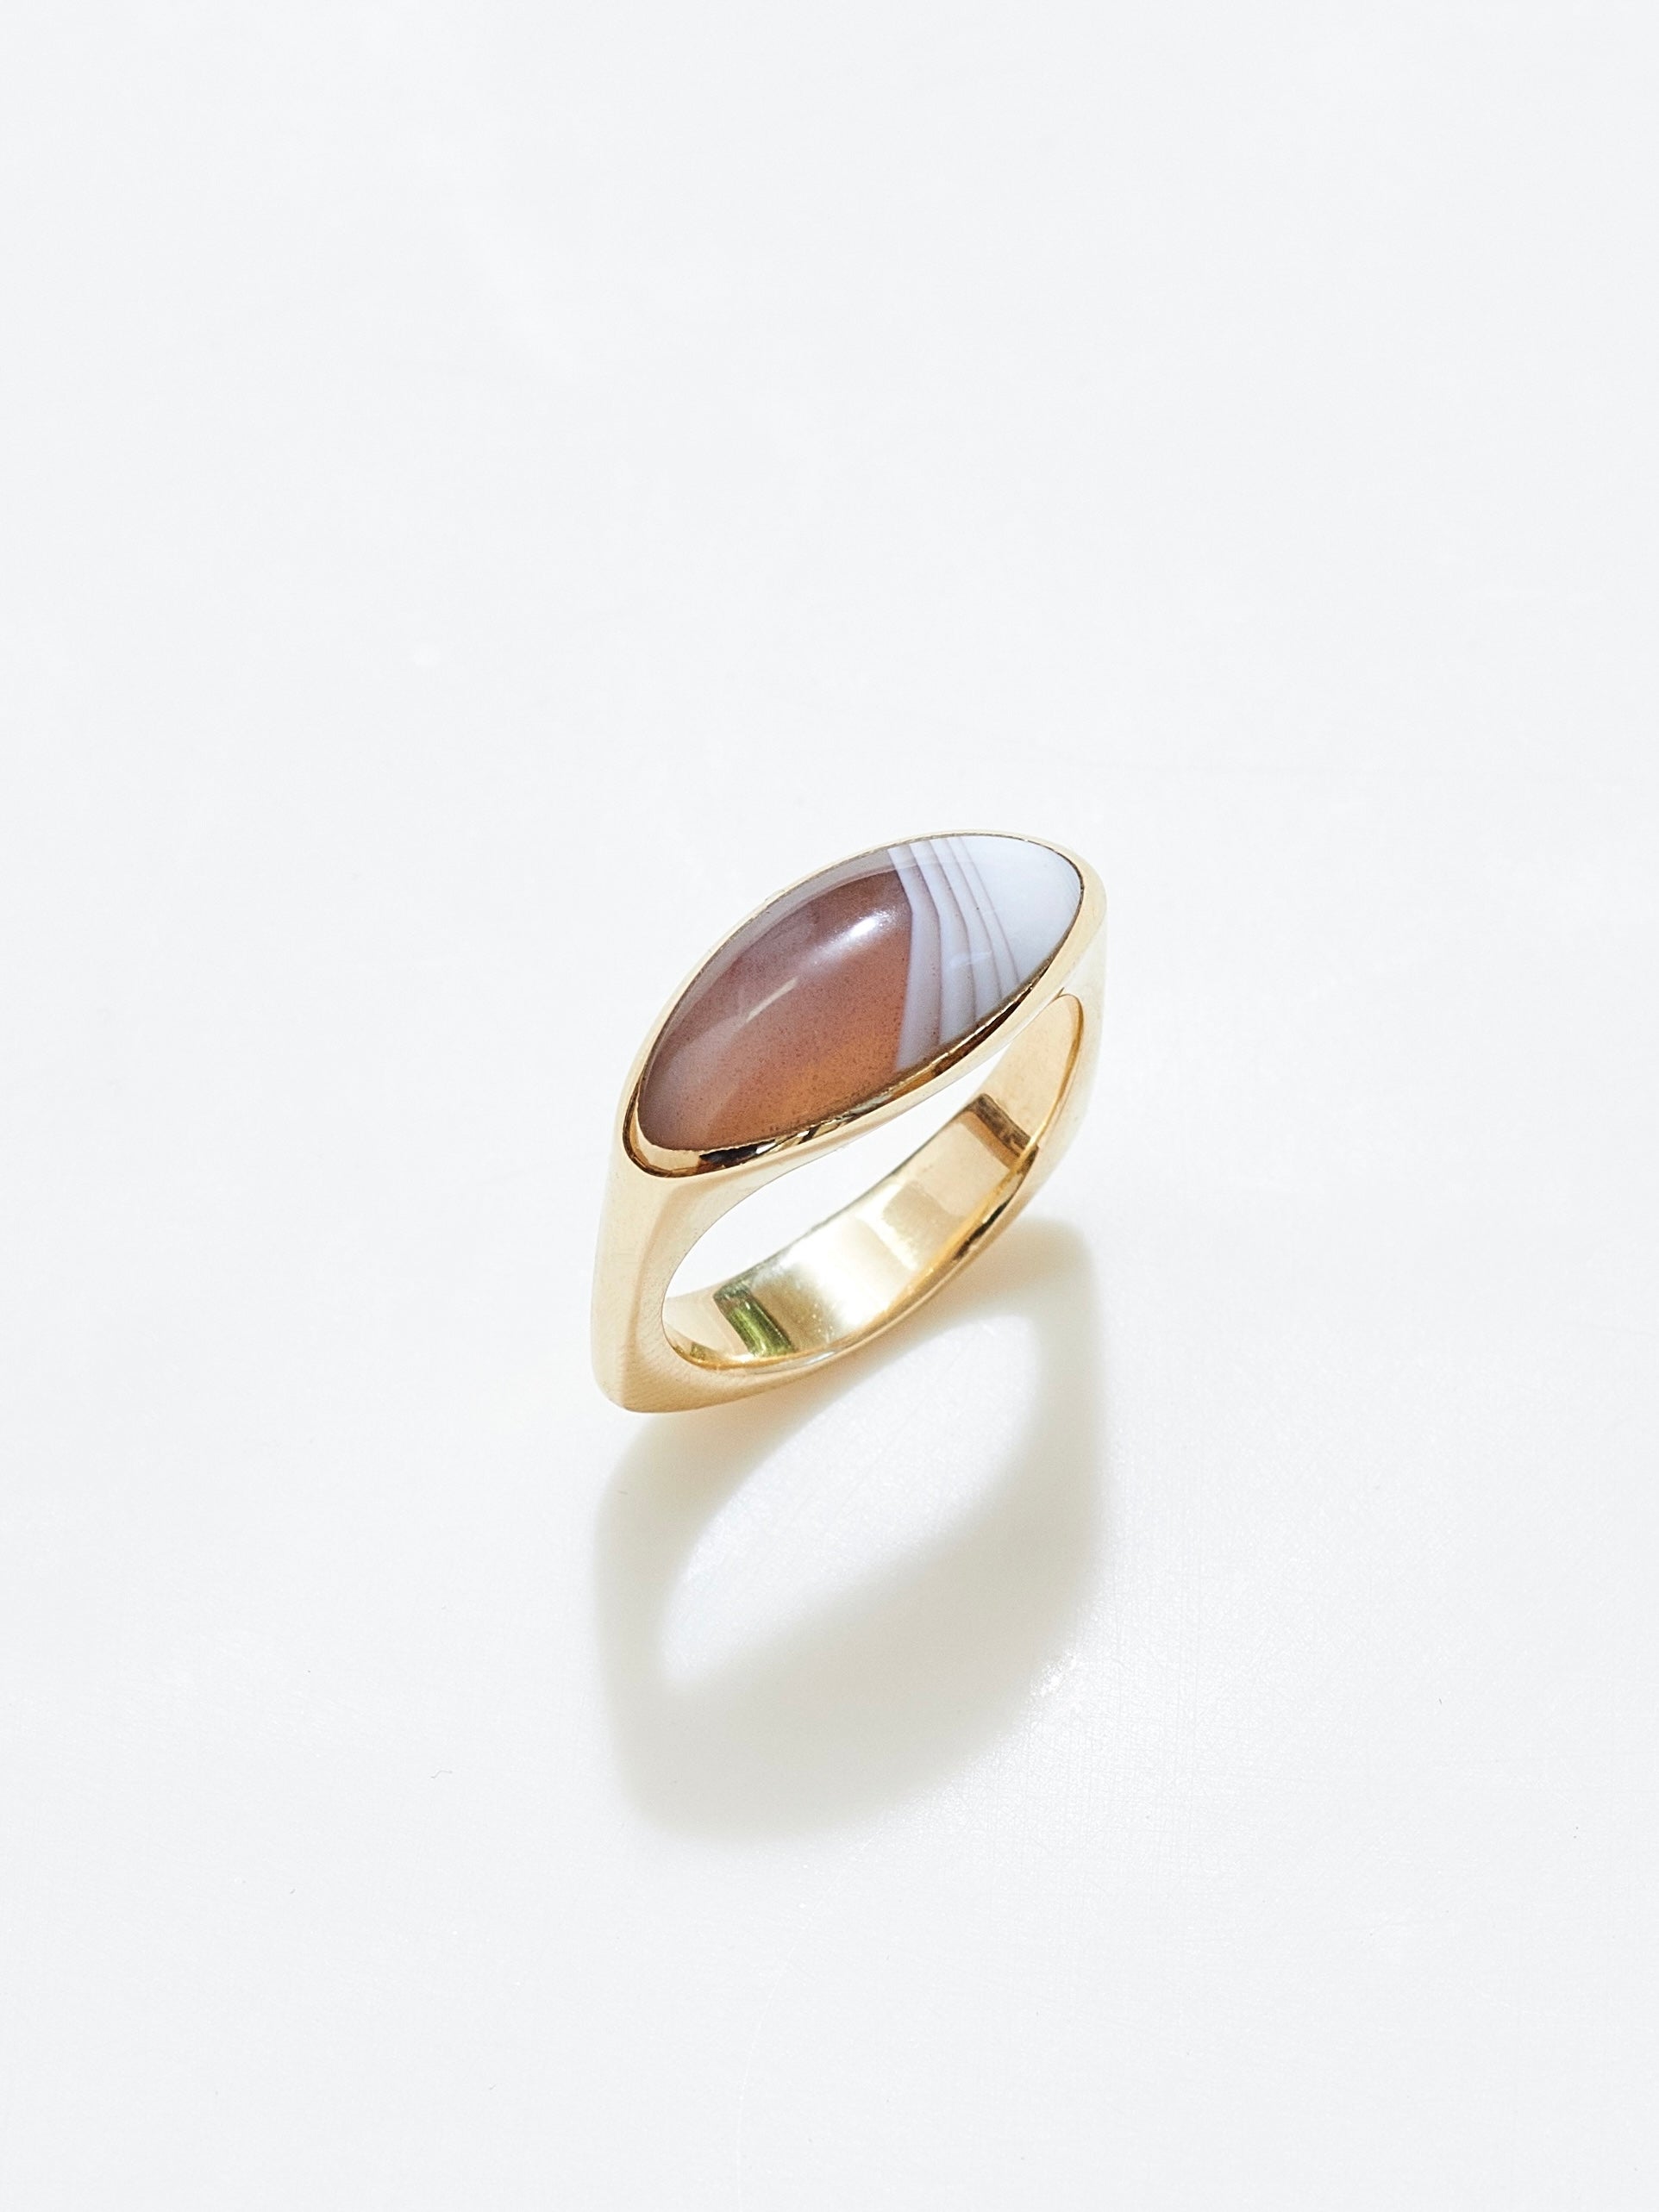 Pilar Ring in 10k Yellow and Botswana Agate, Size 6.5